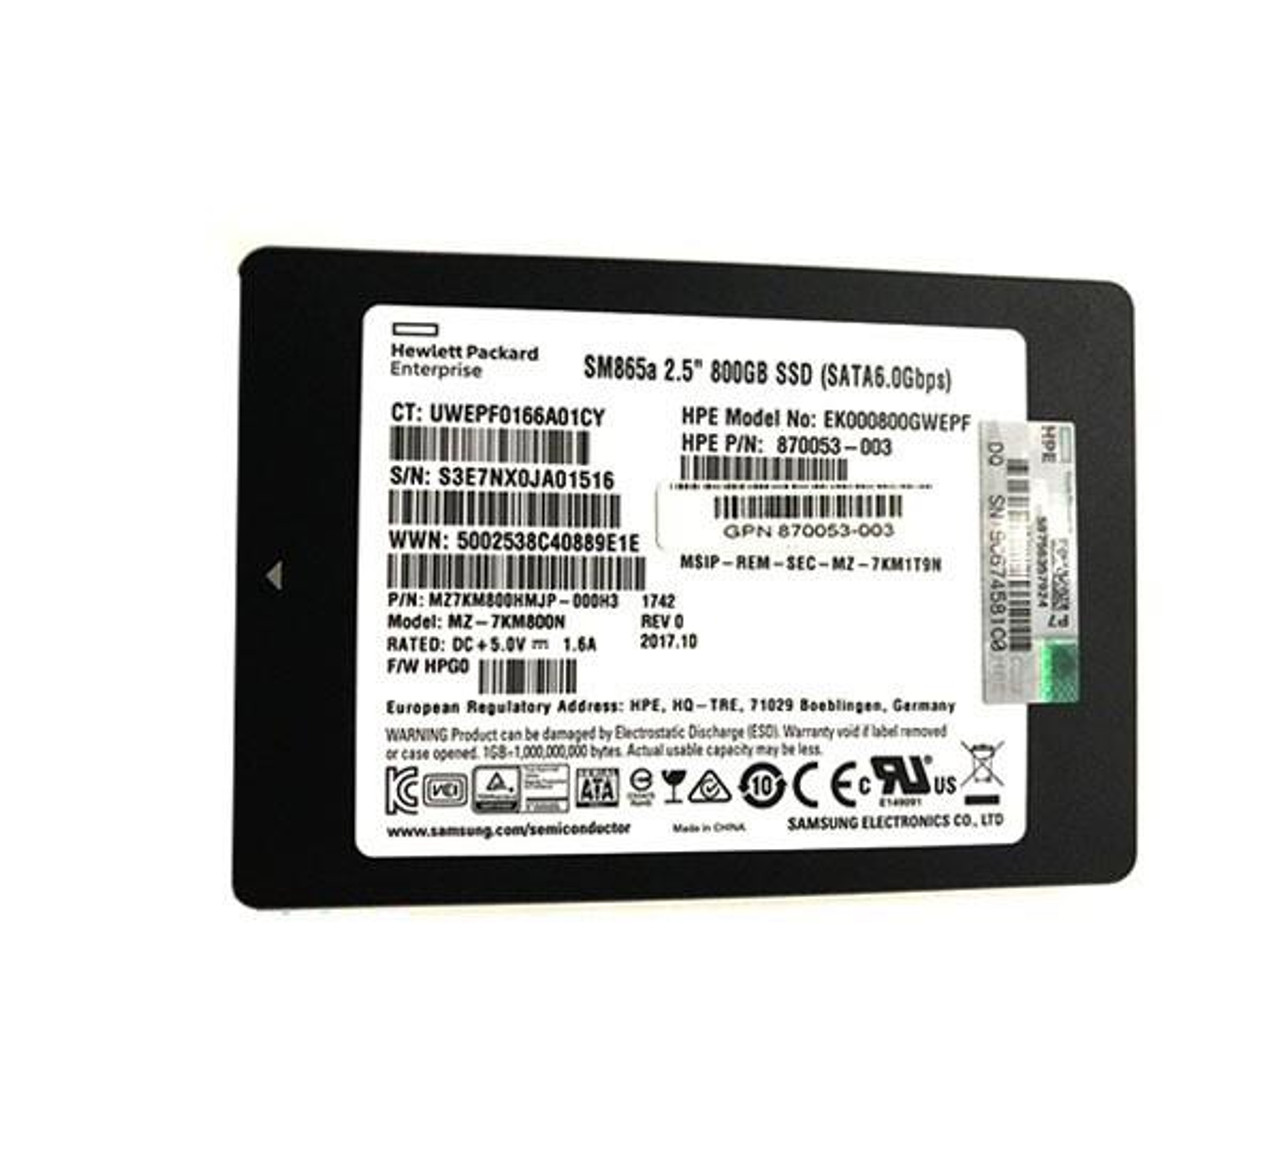 EK000800GWEPF HPE 800GB SATA 6Gbps Write Intensive 2.5-inch Internal Solid State Drive (SSD) with Smart Carrier